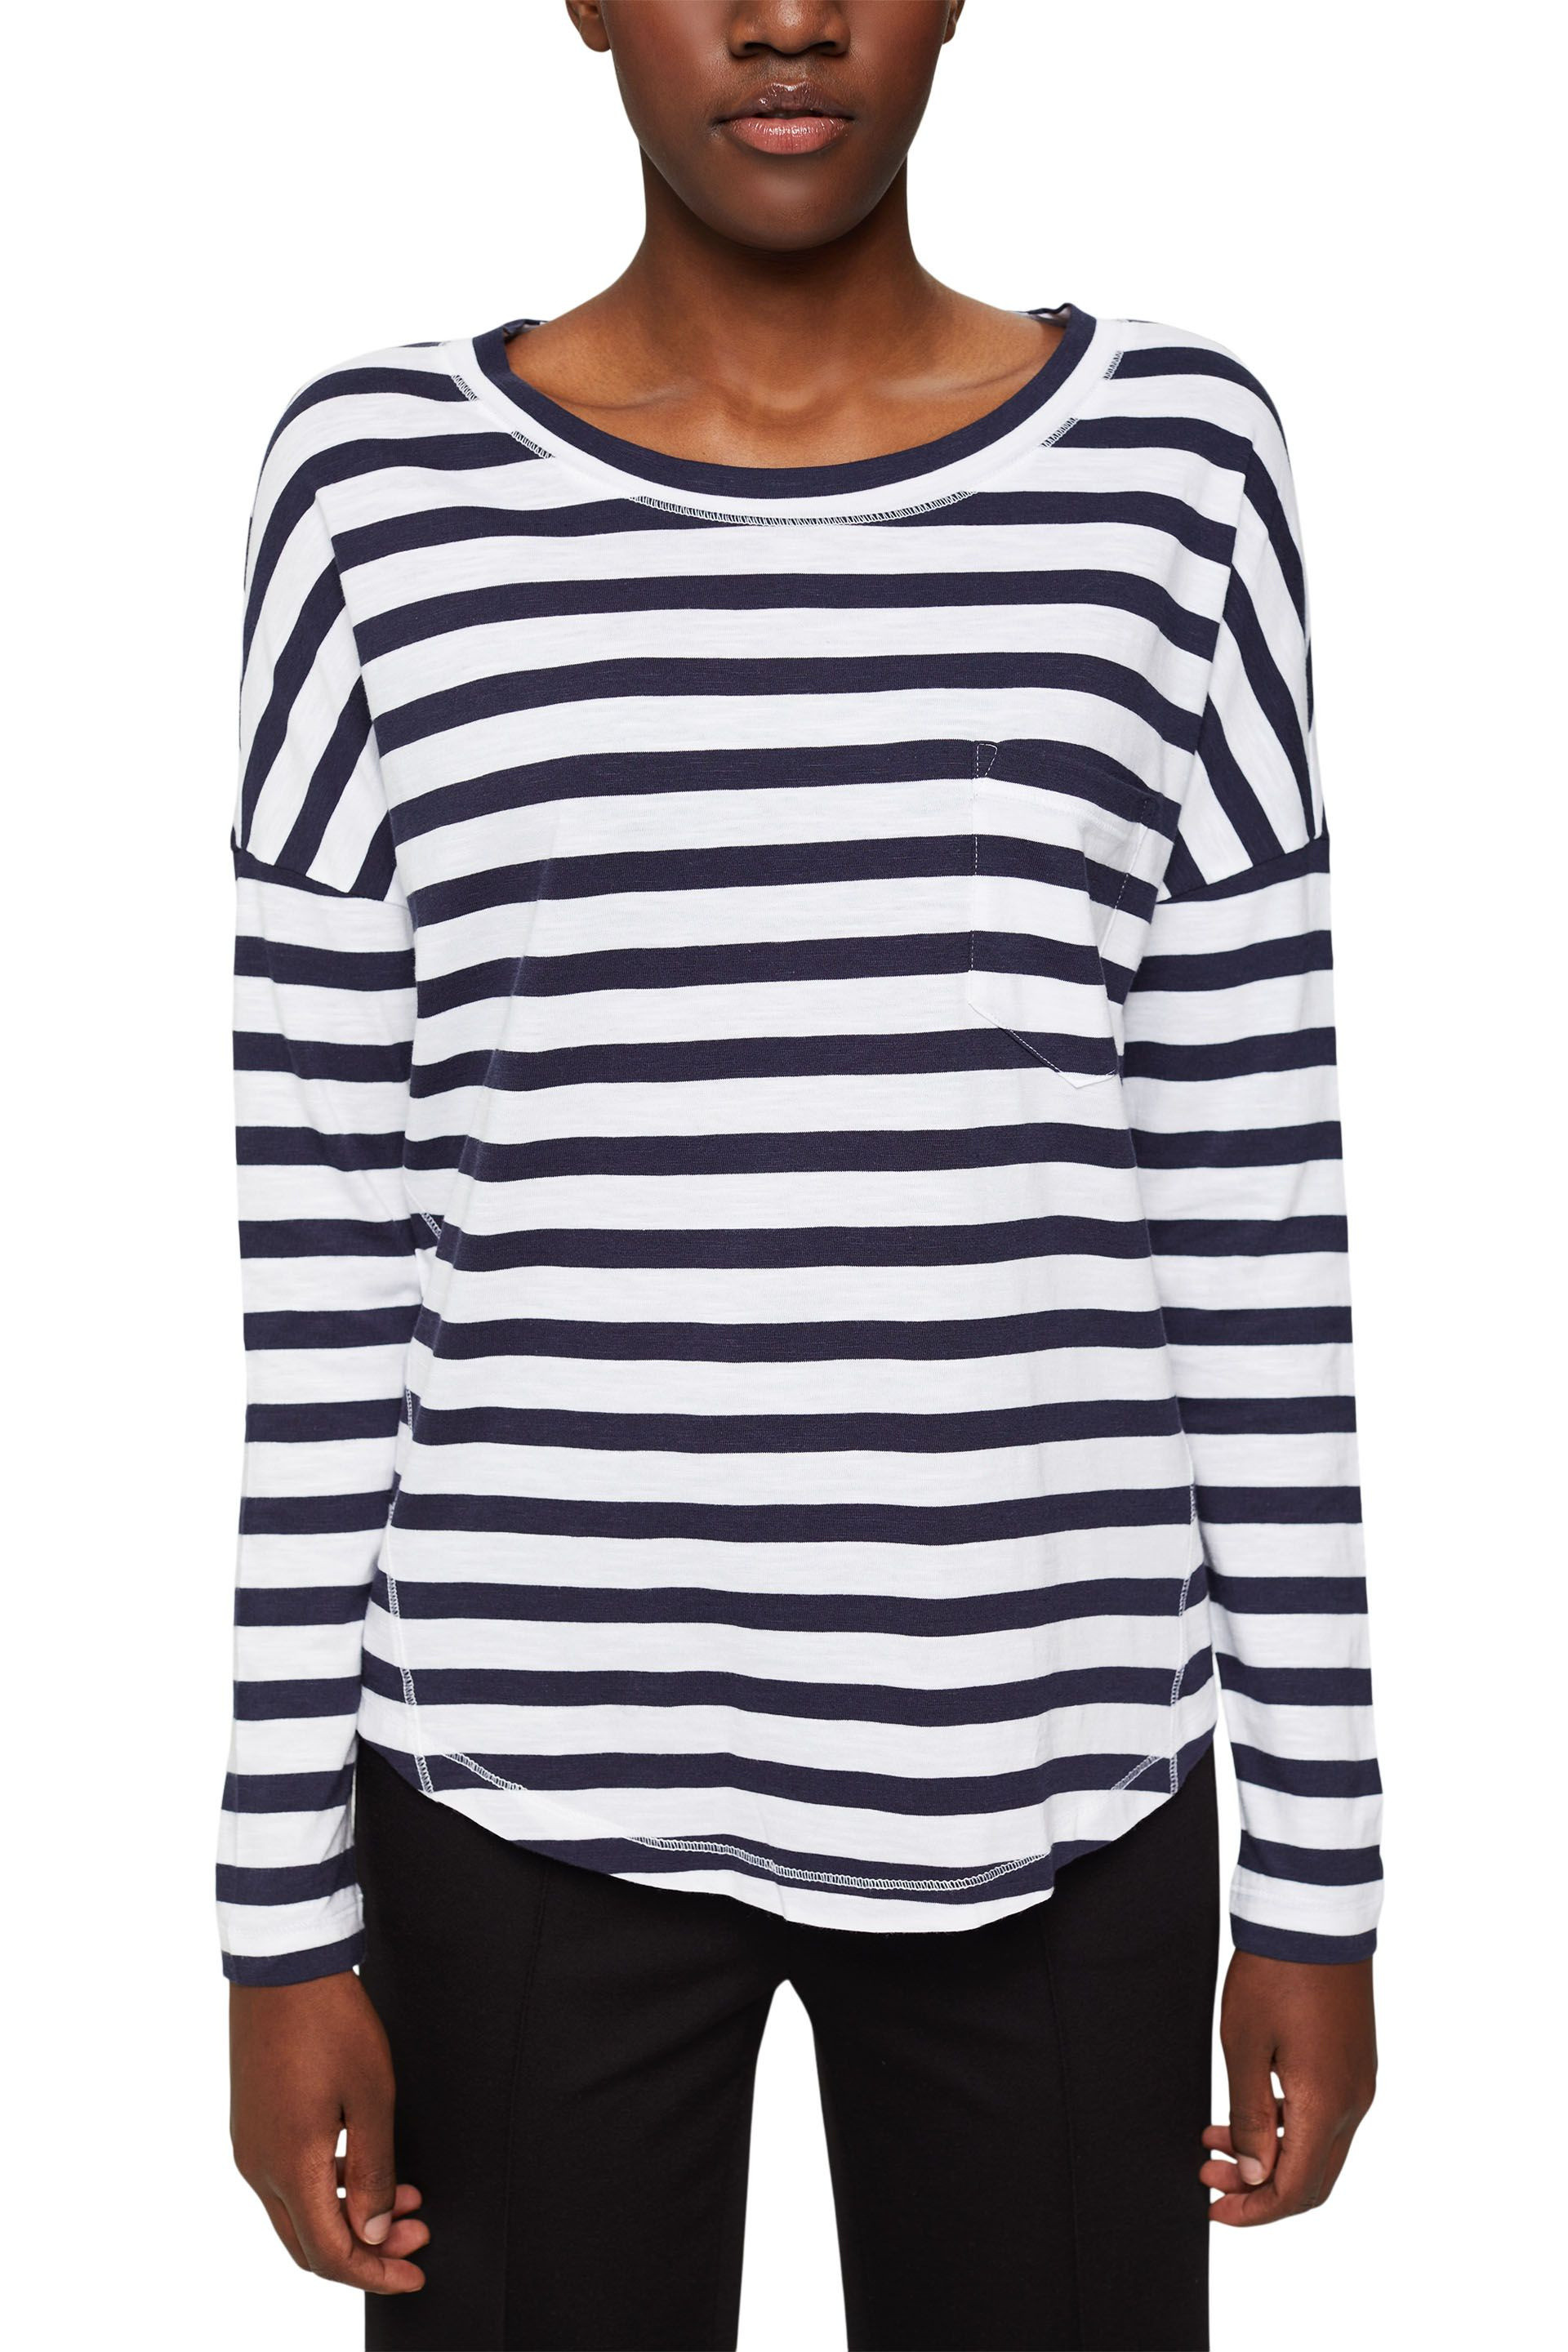 Striped T-shirt with pocket, White, large image number 1